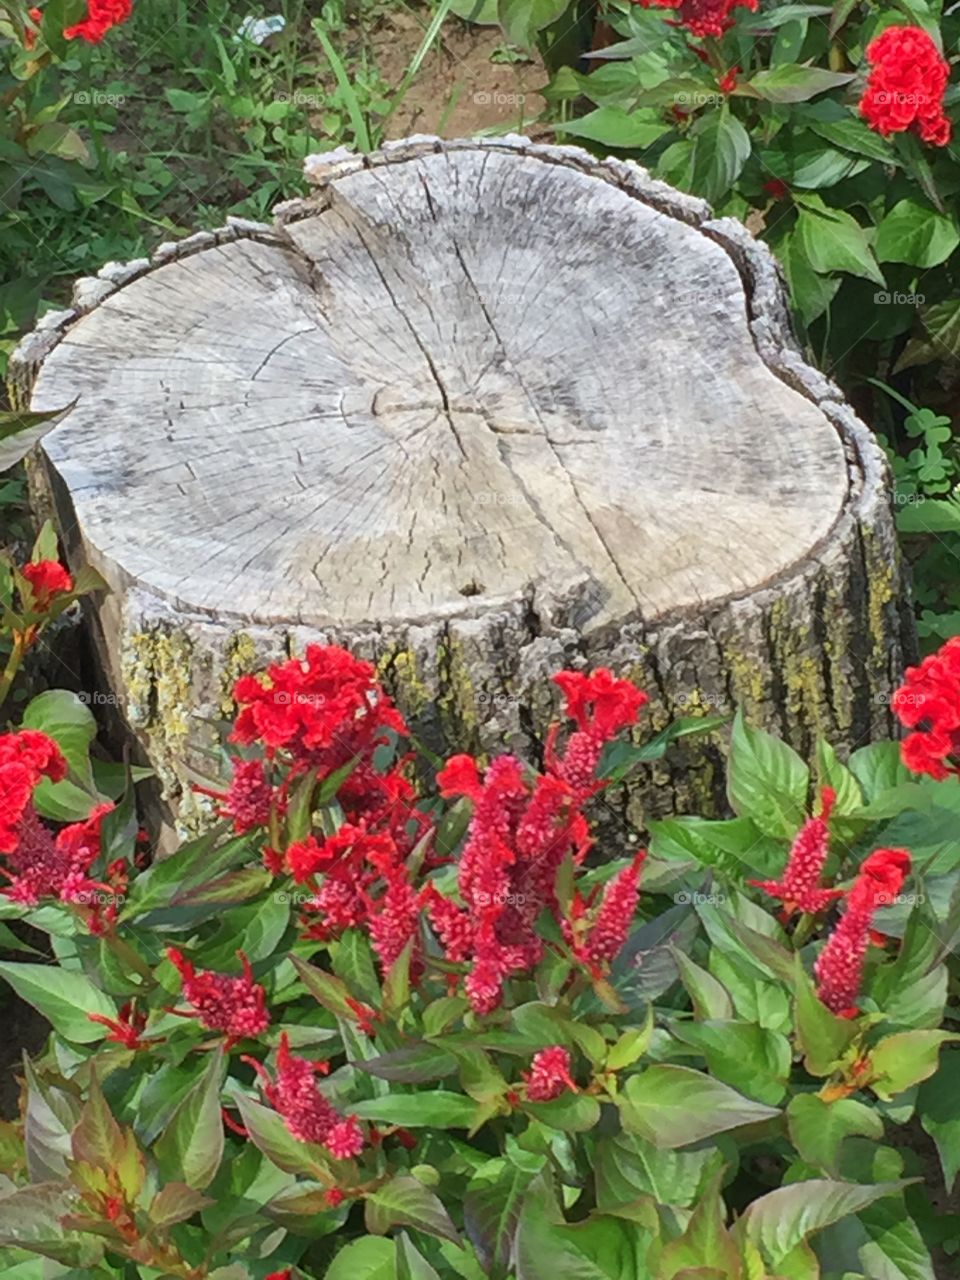 Stump With Flowers. A garden and stump on my walk through my Queens Village, NY neighborhood.